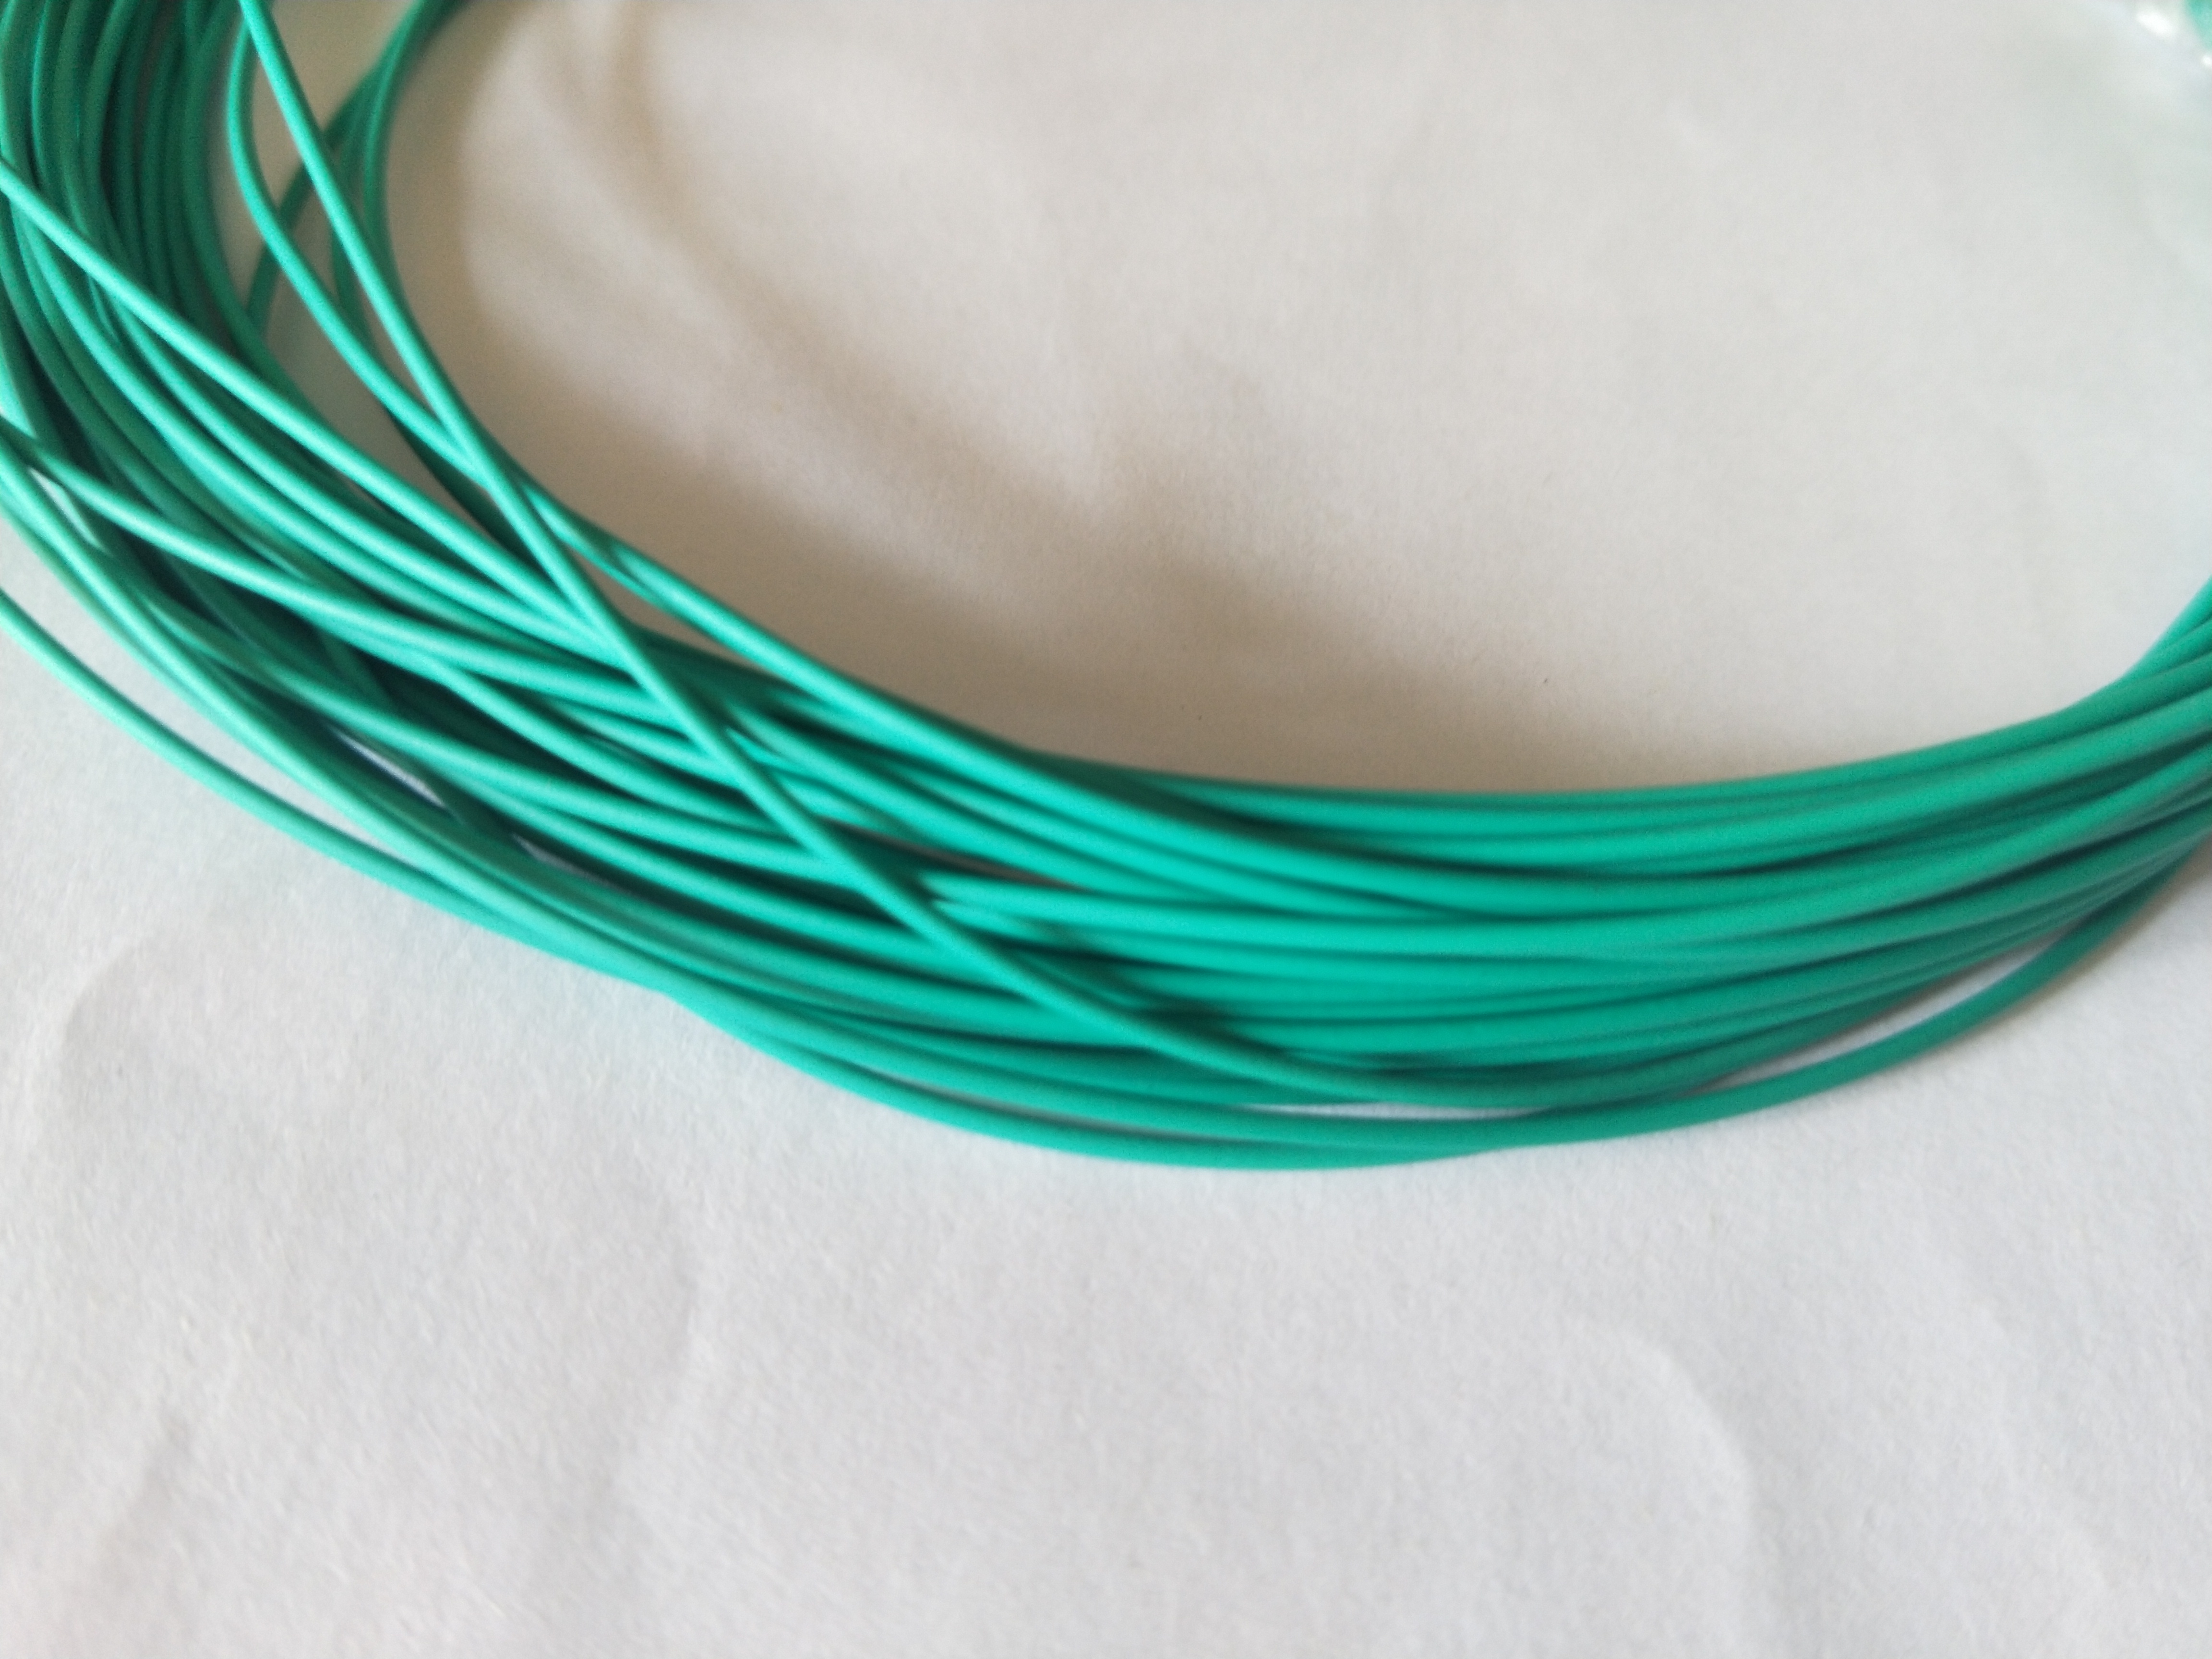 motor lead rubber wire cable, Oil Resistant Motor Lead wire,Flexible Super Resistant Heat Motor Lead Wire Cable 